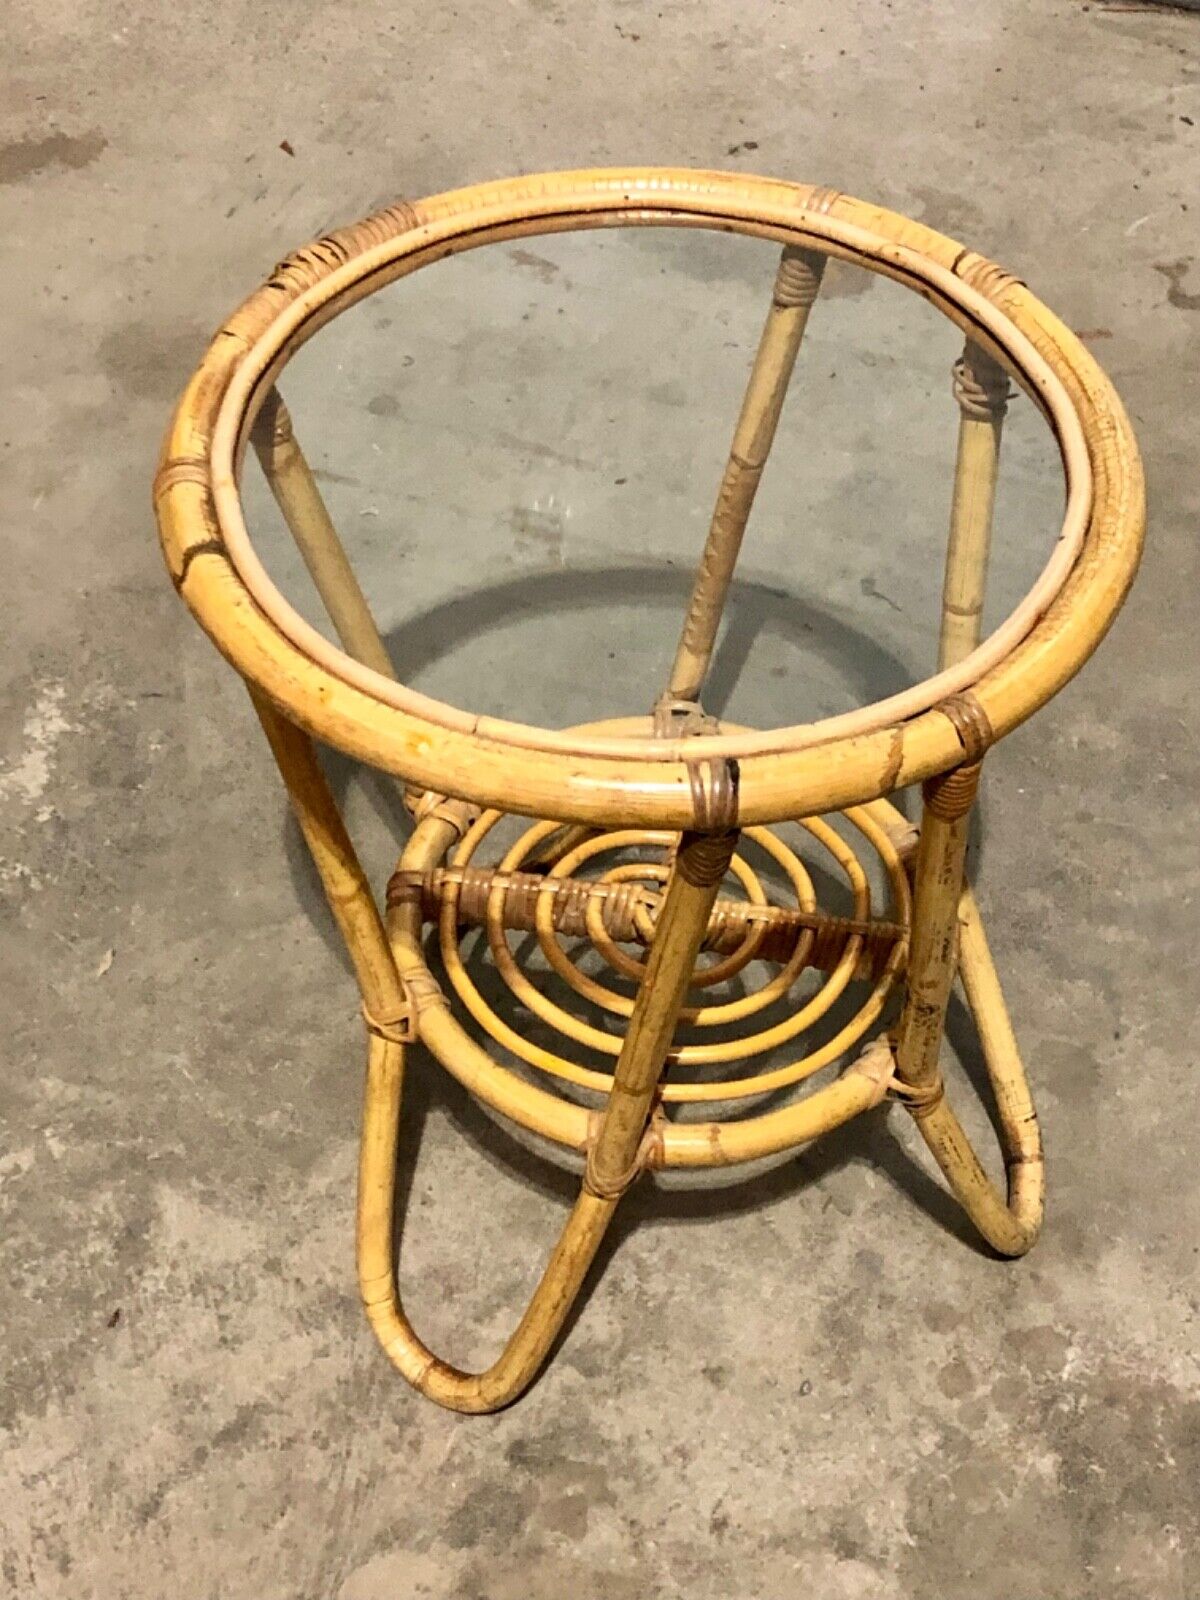 000782....Pair Of Vintage Bamboo Round Coffee Tables / Occasional Tables